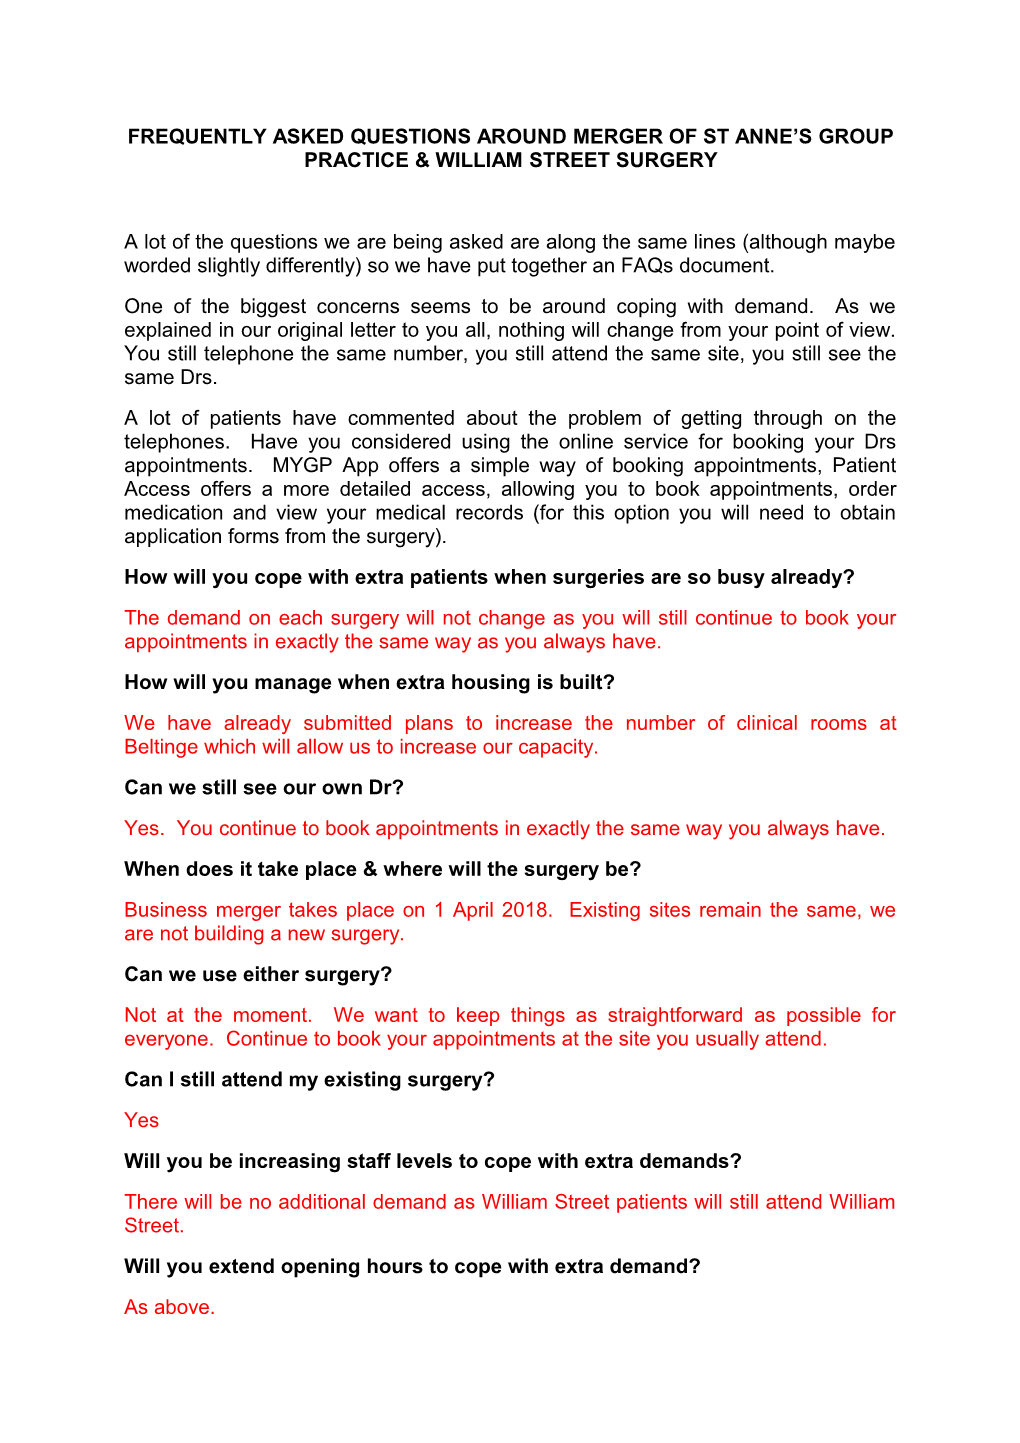 Frequently Asked Questions Around Merger of St Anne S Group Practice & William Street Surgery